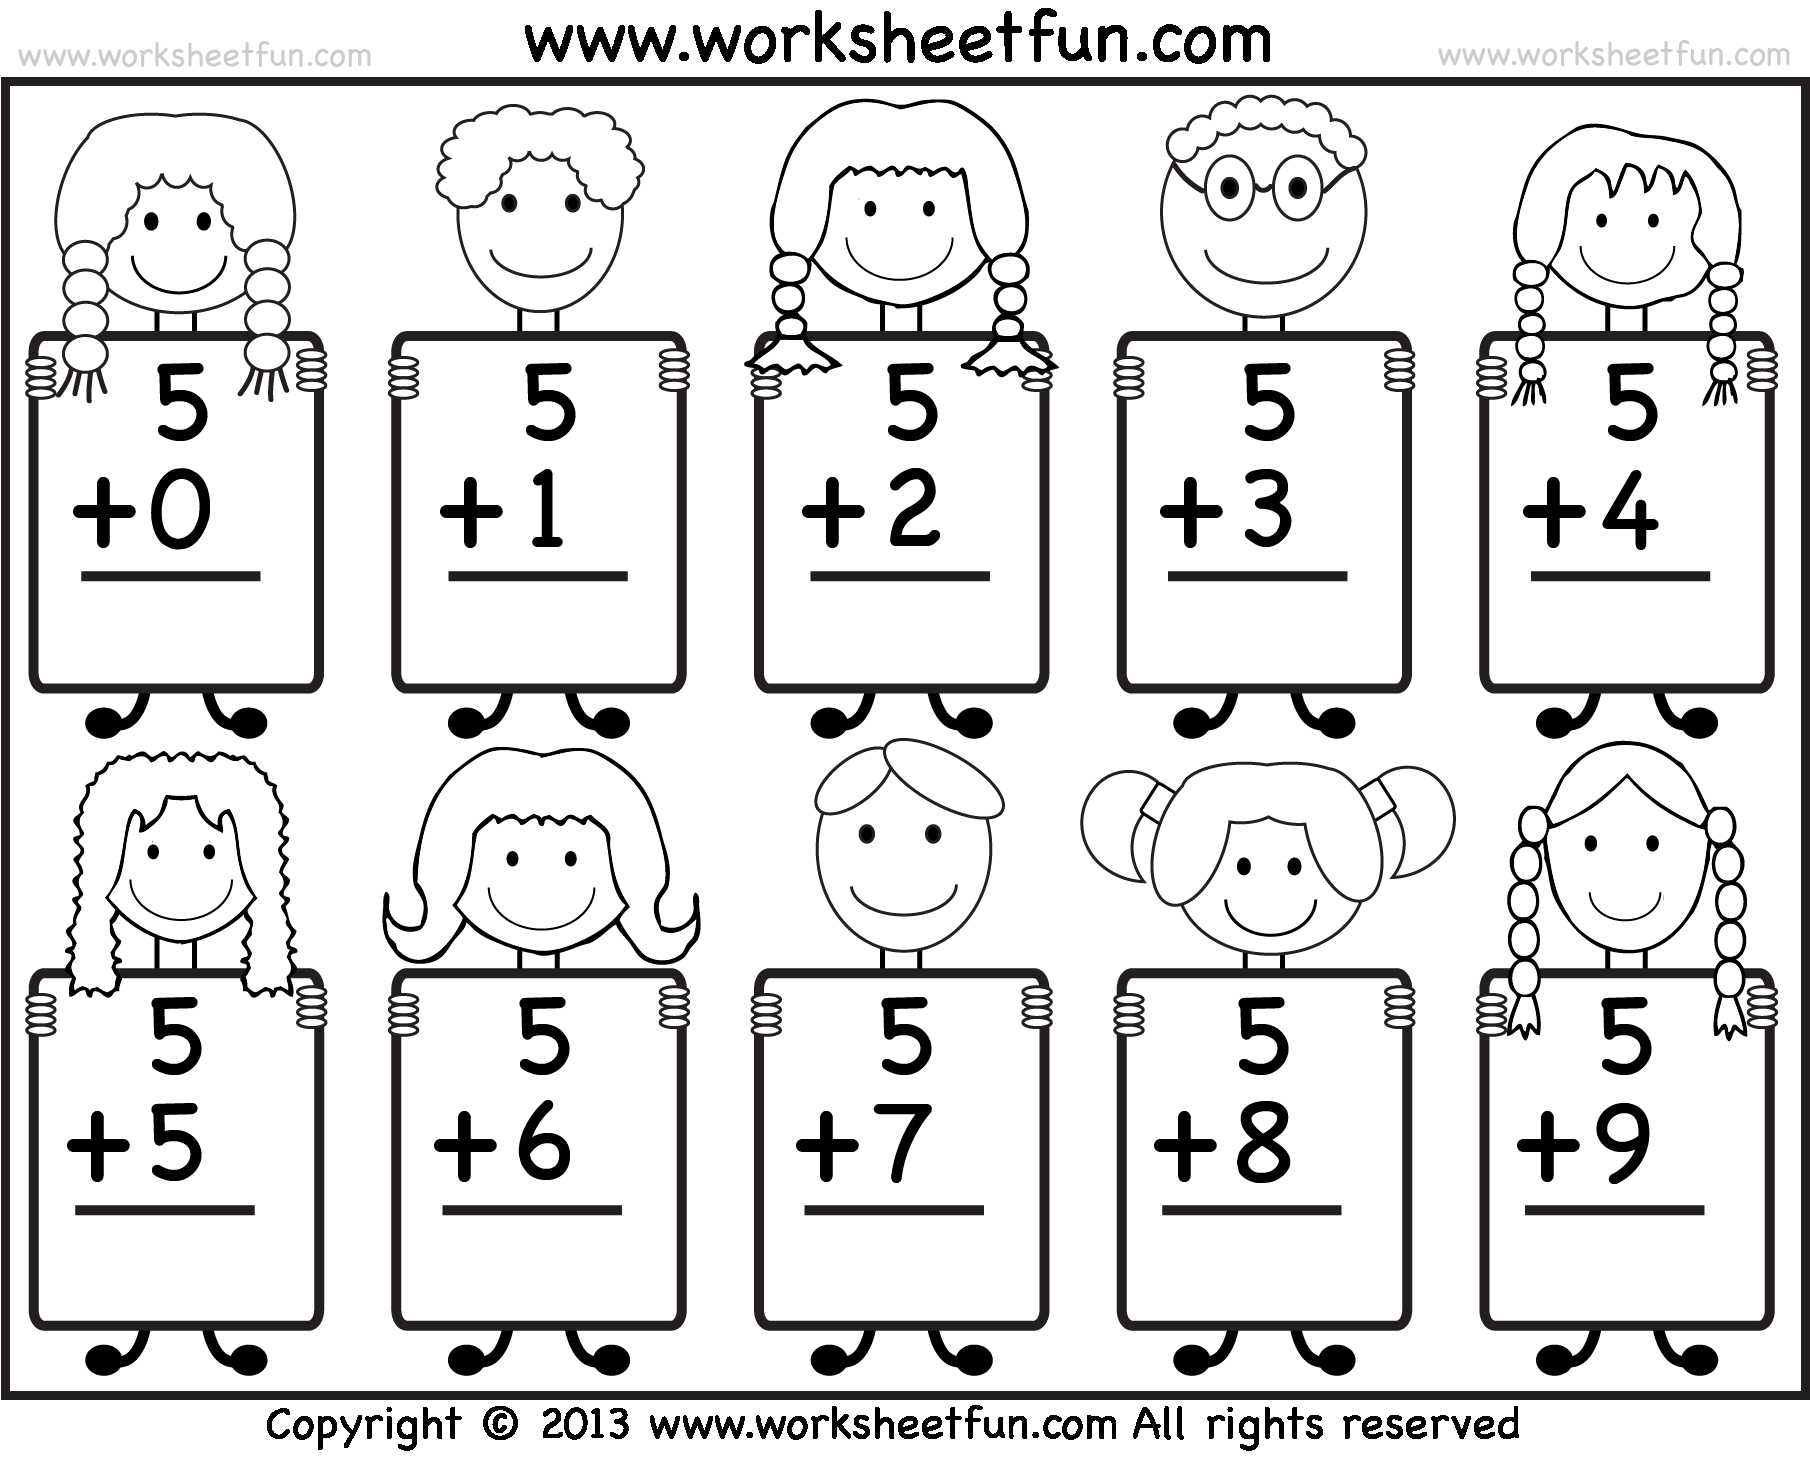 Christmas Worksheets for Middle School as Well as Free Printable Christmas Math Worksheets for First Grade